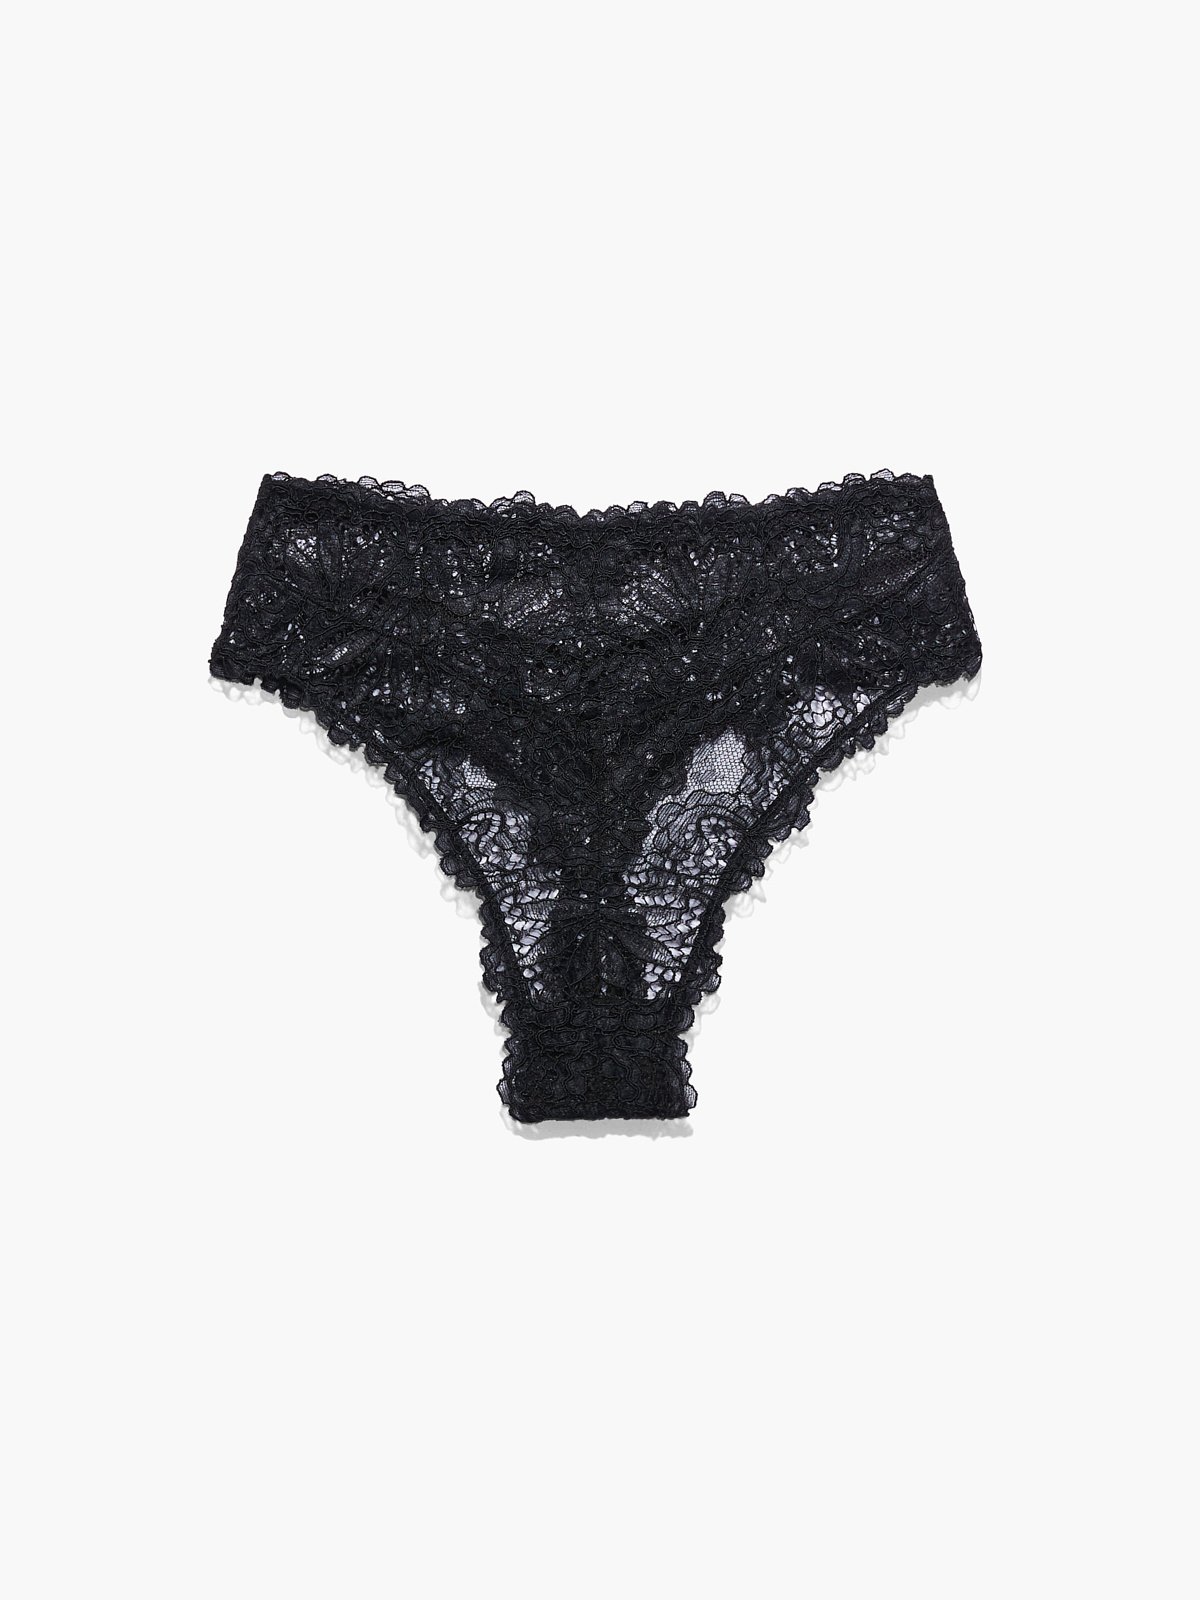 Romantic Corded Lace High-Waist Thong in Black | SAVAGE X FENTY UK ...